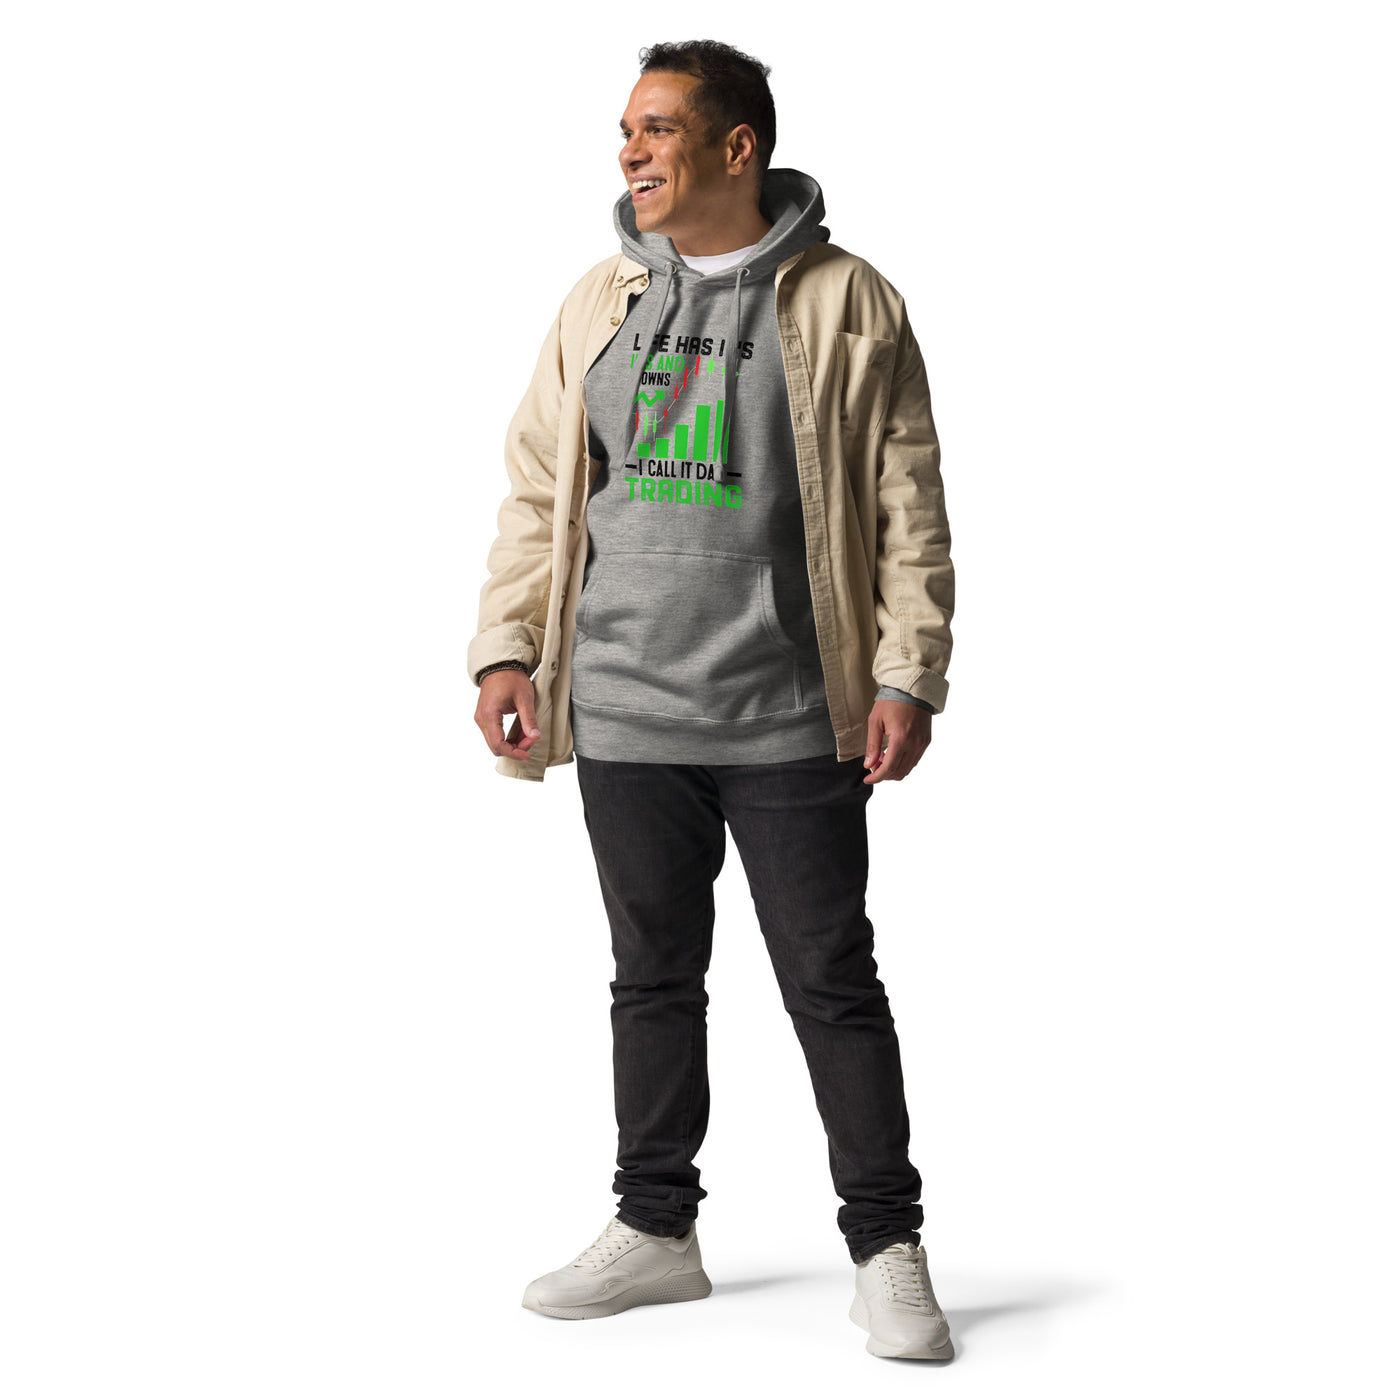 Life Has it's ups and down; I Call it Day Trading in Dark Text - Unisex Hoodie